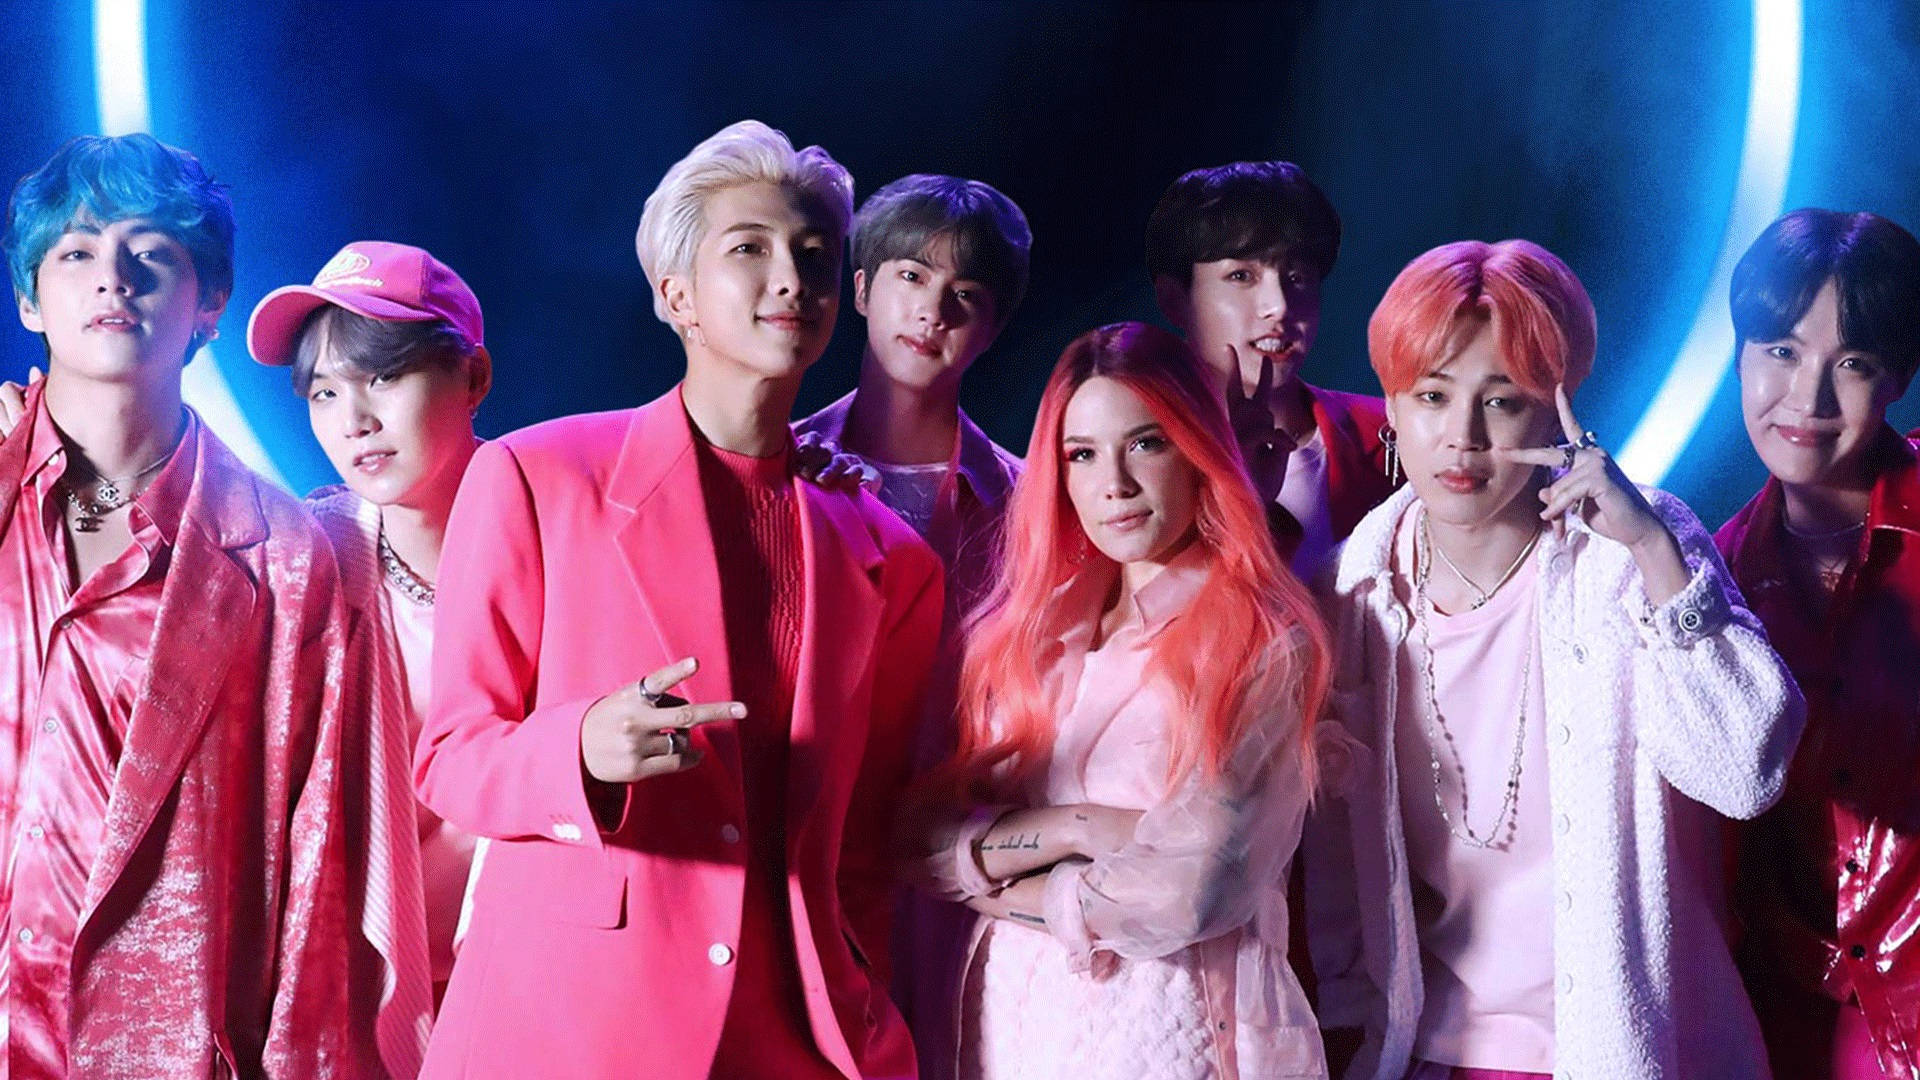 Halsey Boy With Luv Background